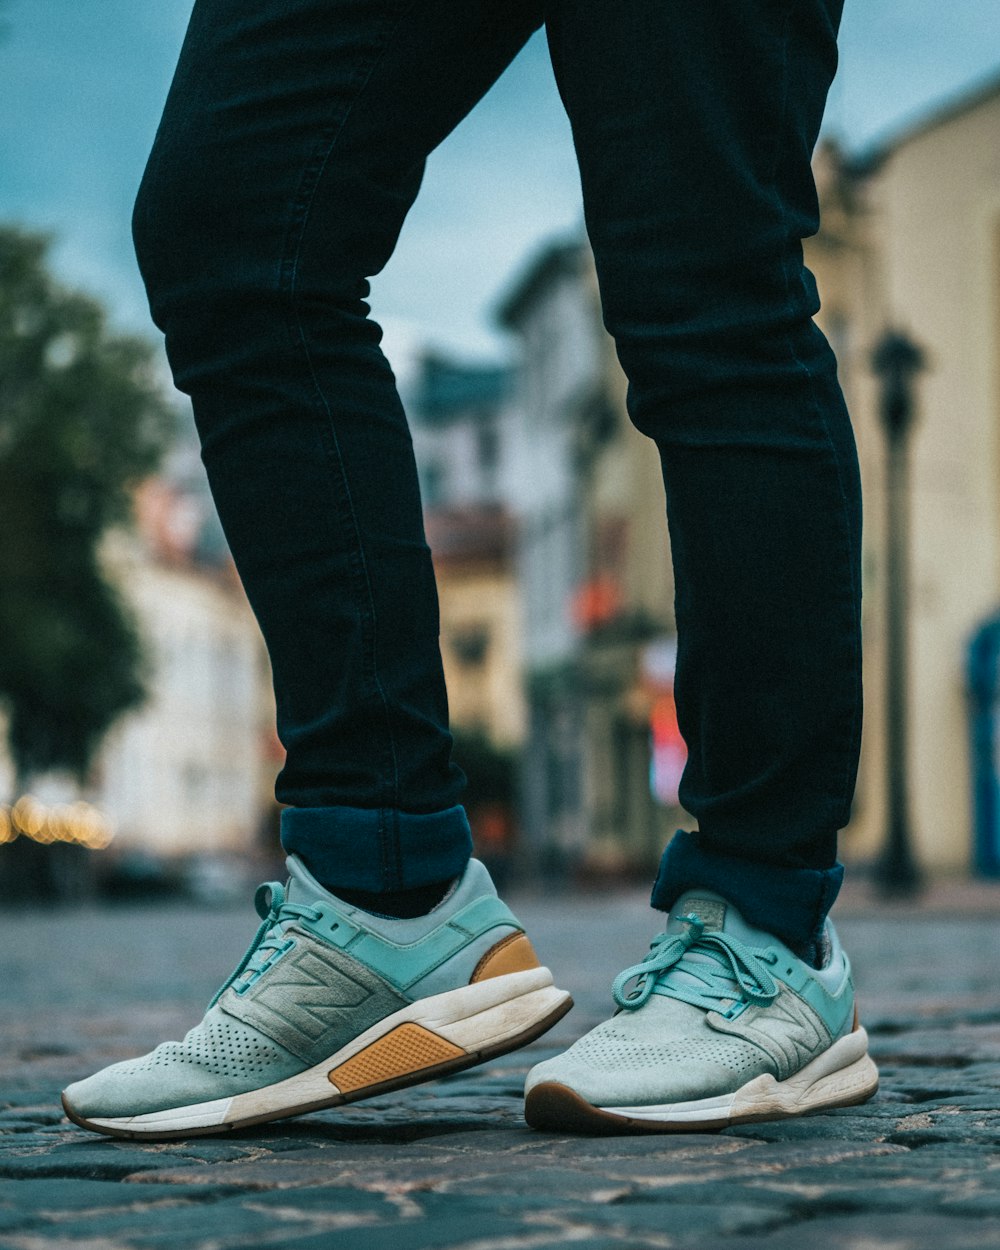 Person in blue denim jeans wearing white and gold nike sneakers photo –  Free Grodno Image on Unsplash